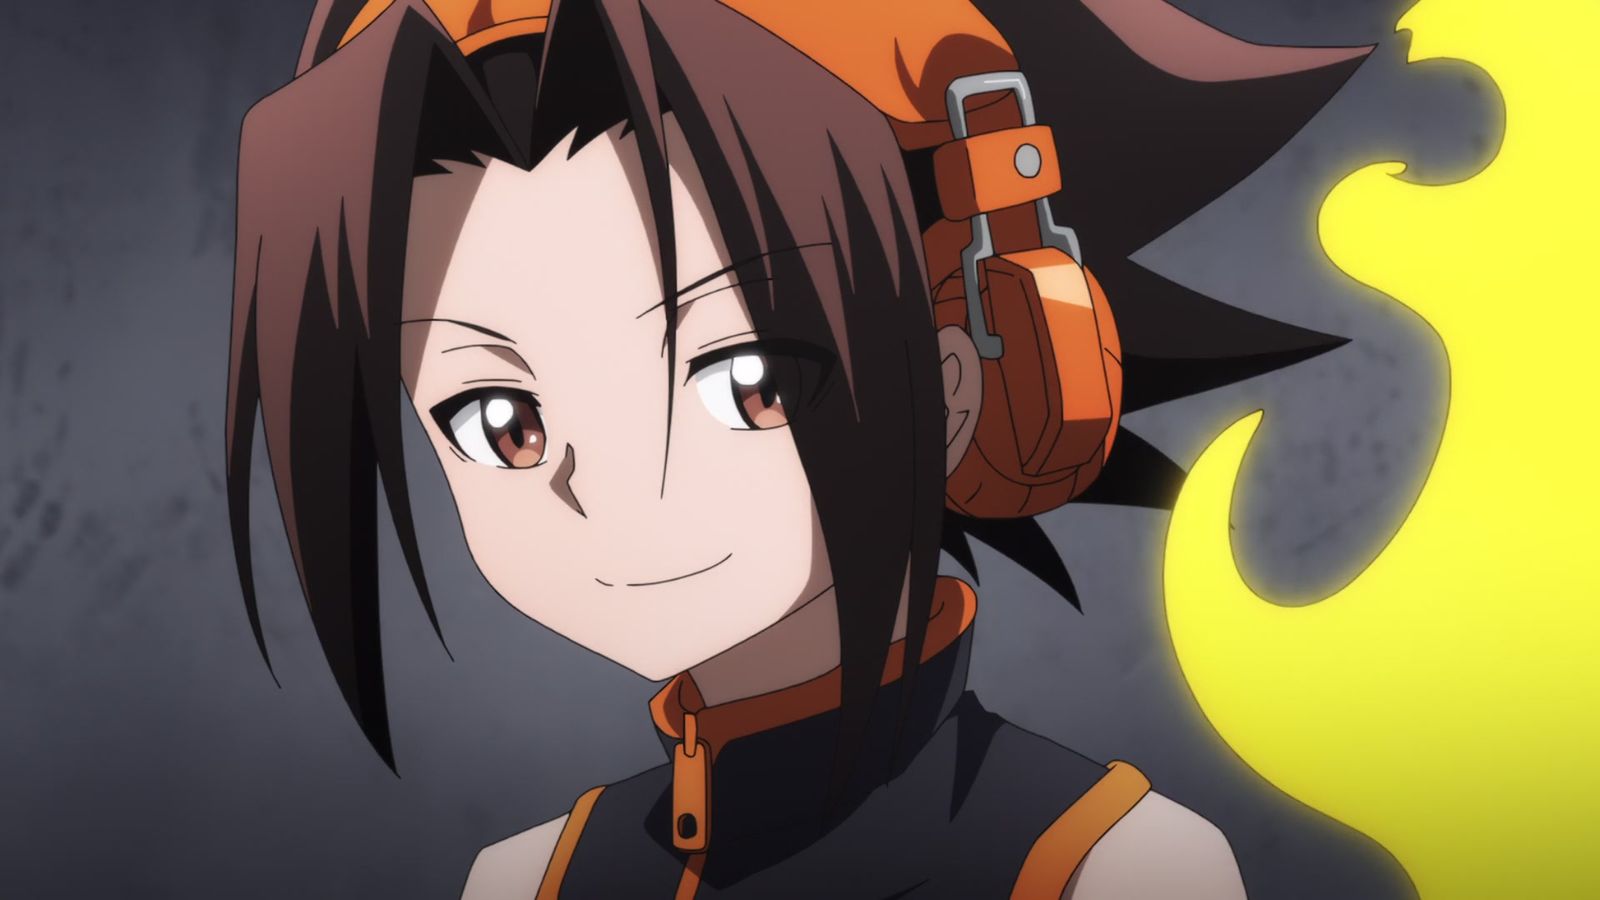 Who Does Yoh End Up With in Shaman King? Content